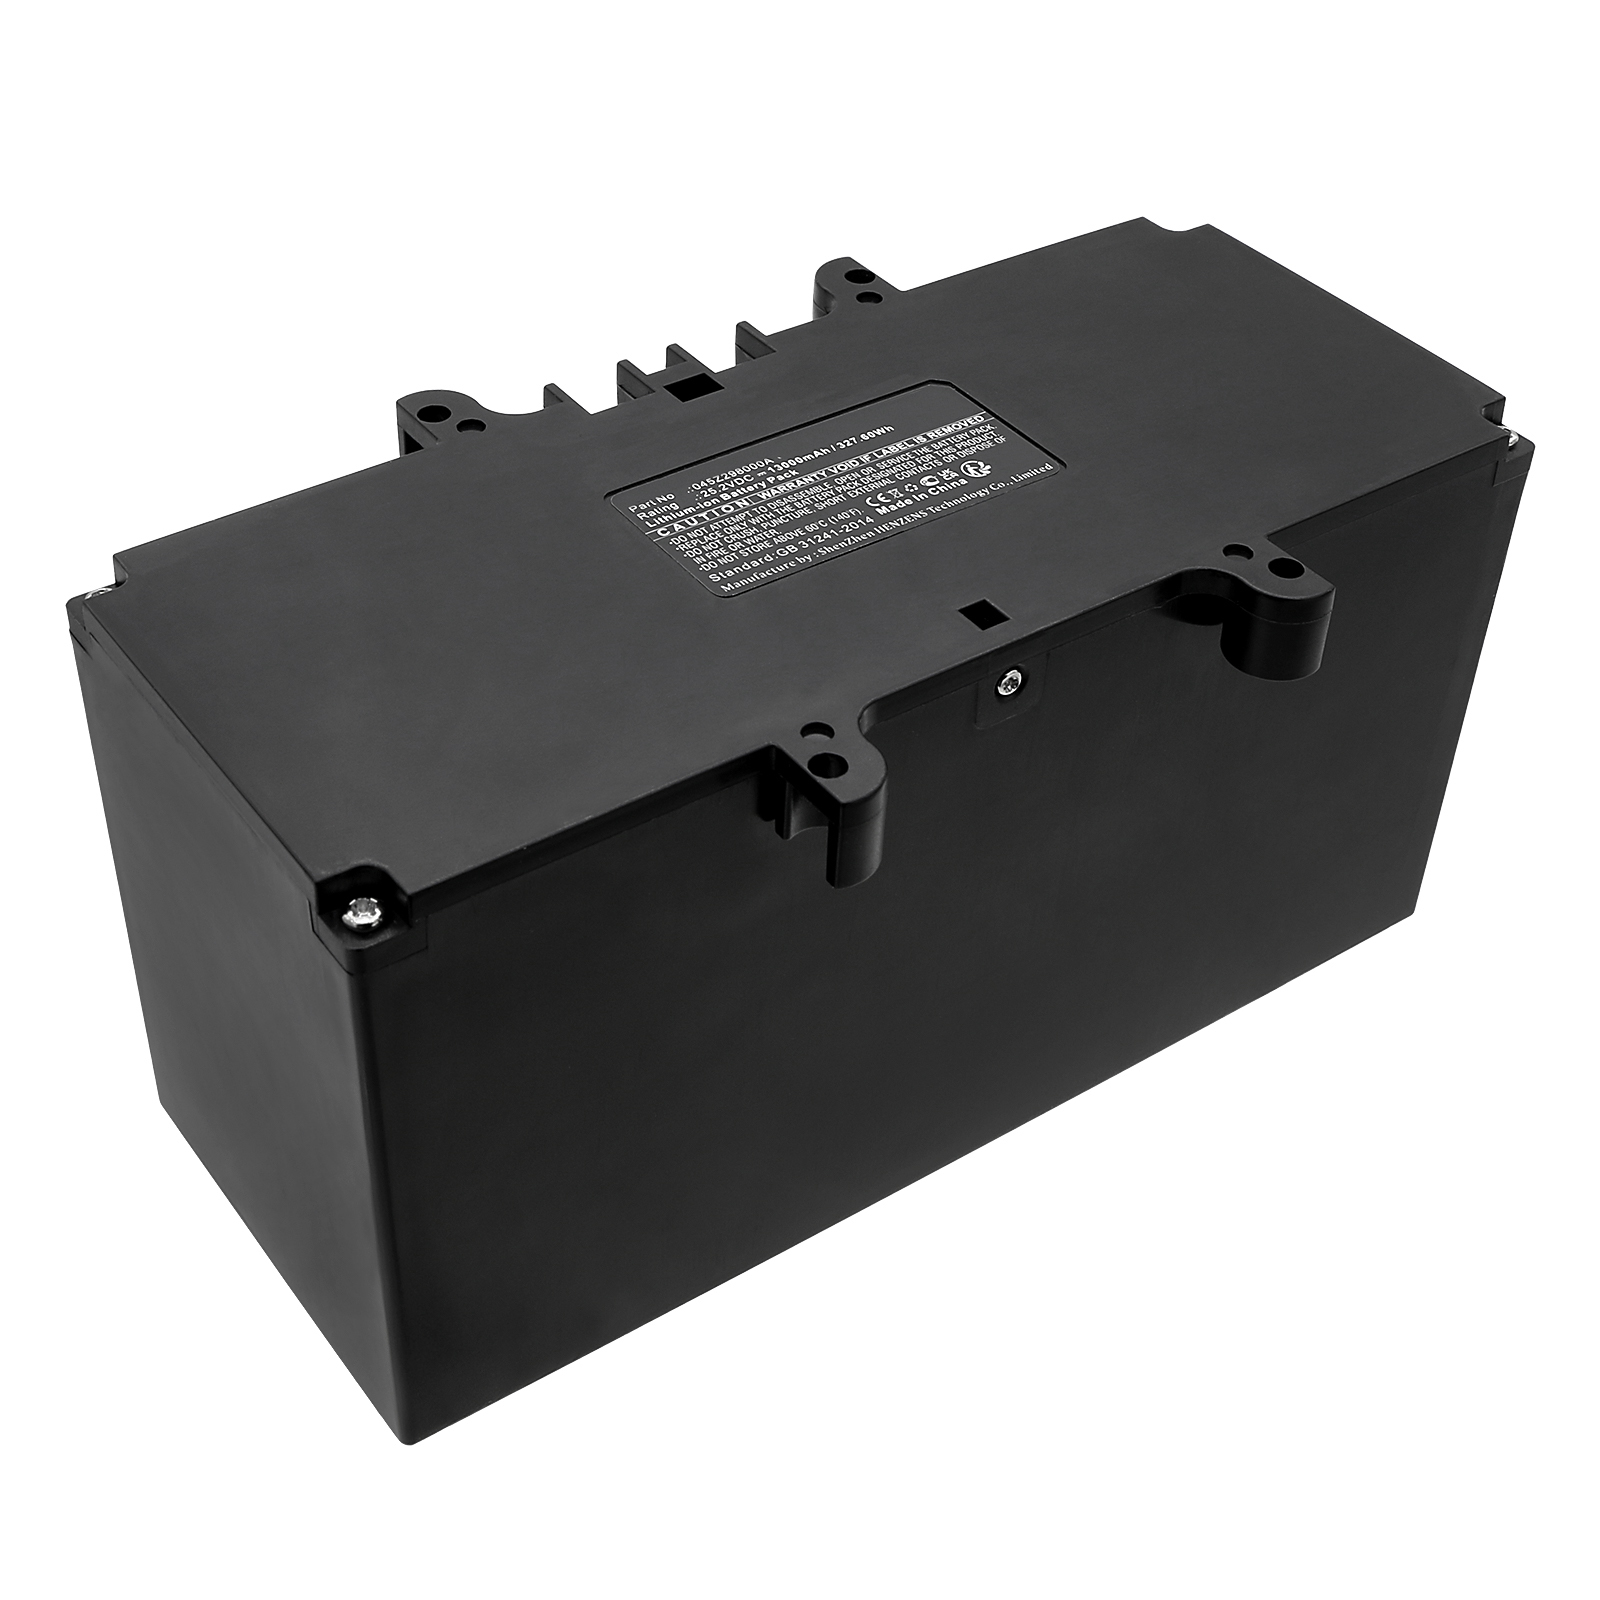 Synergy Digital Lawn Mower Battery, Compatible with Ambrogio 045Z298000A Lawn Mower Battery (Li-ion, 25.2V, 13000mAh)